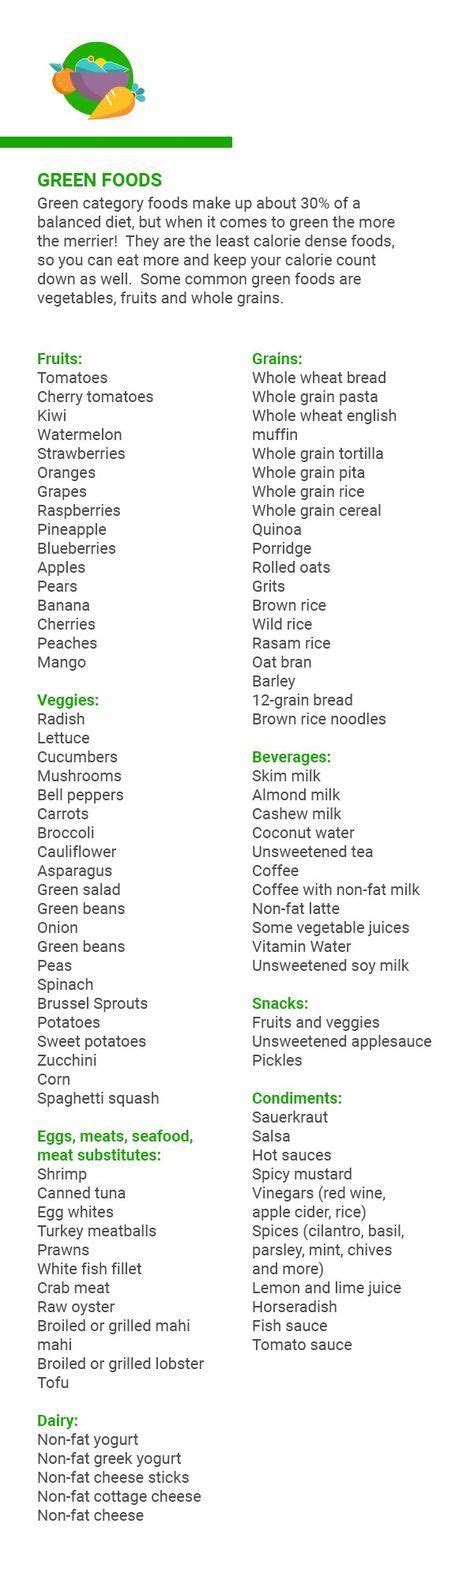 Food from the green group should fill the majority of your diet, as these are less calorie dense and will help to make you feel full. Pin on noom yellow foods